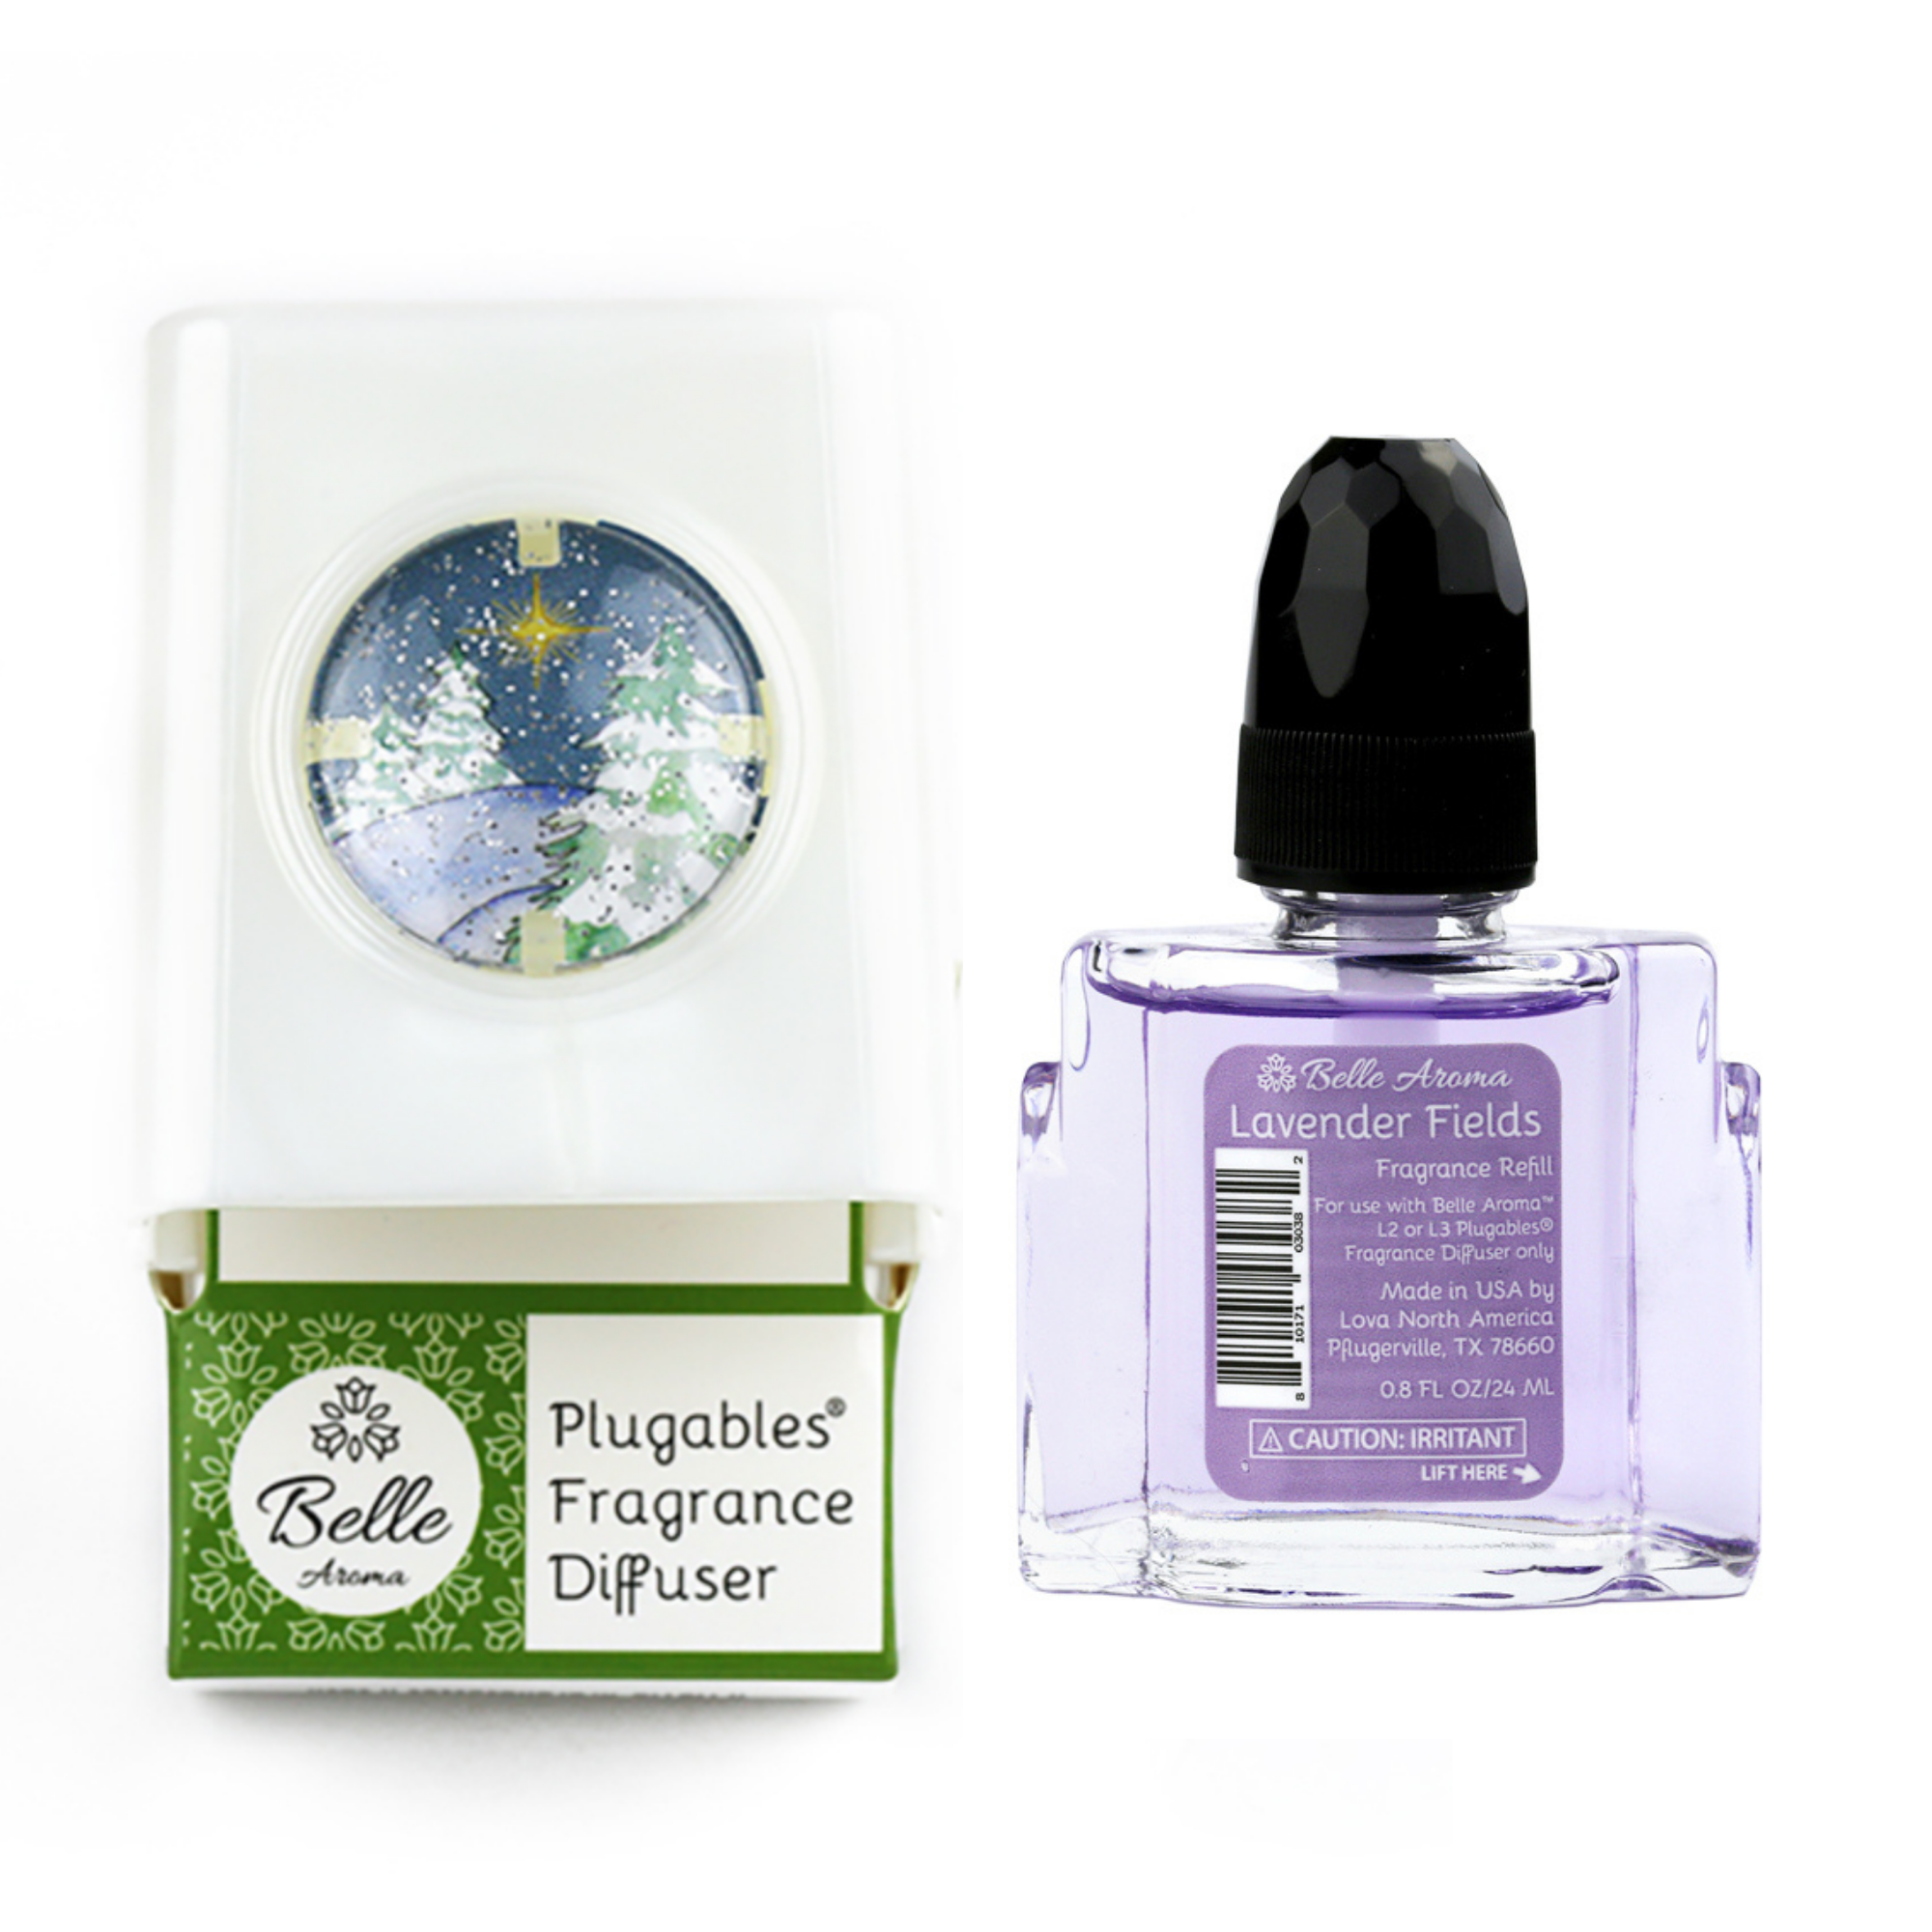 Glitter Domes™ Plugables® Aromalectric® Scented Oil Diffuser - Snowy Scene with Lavender Fields Fragrance Oil Home Fragrance Accessories